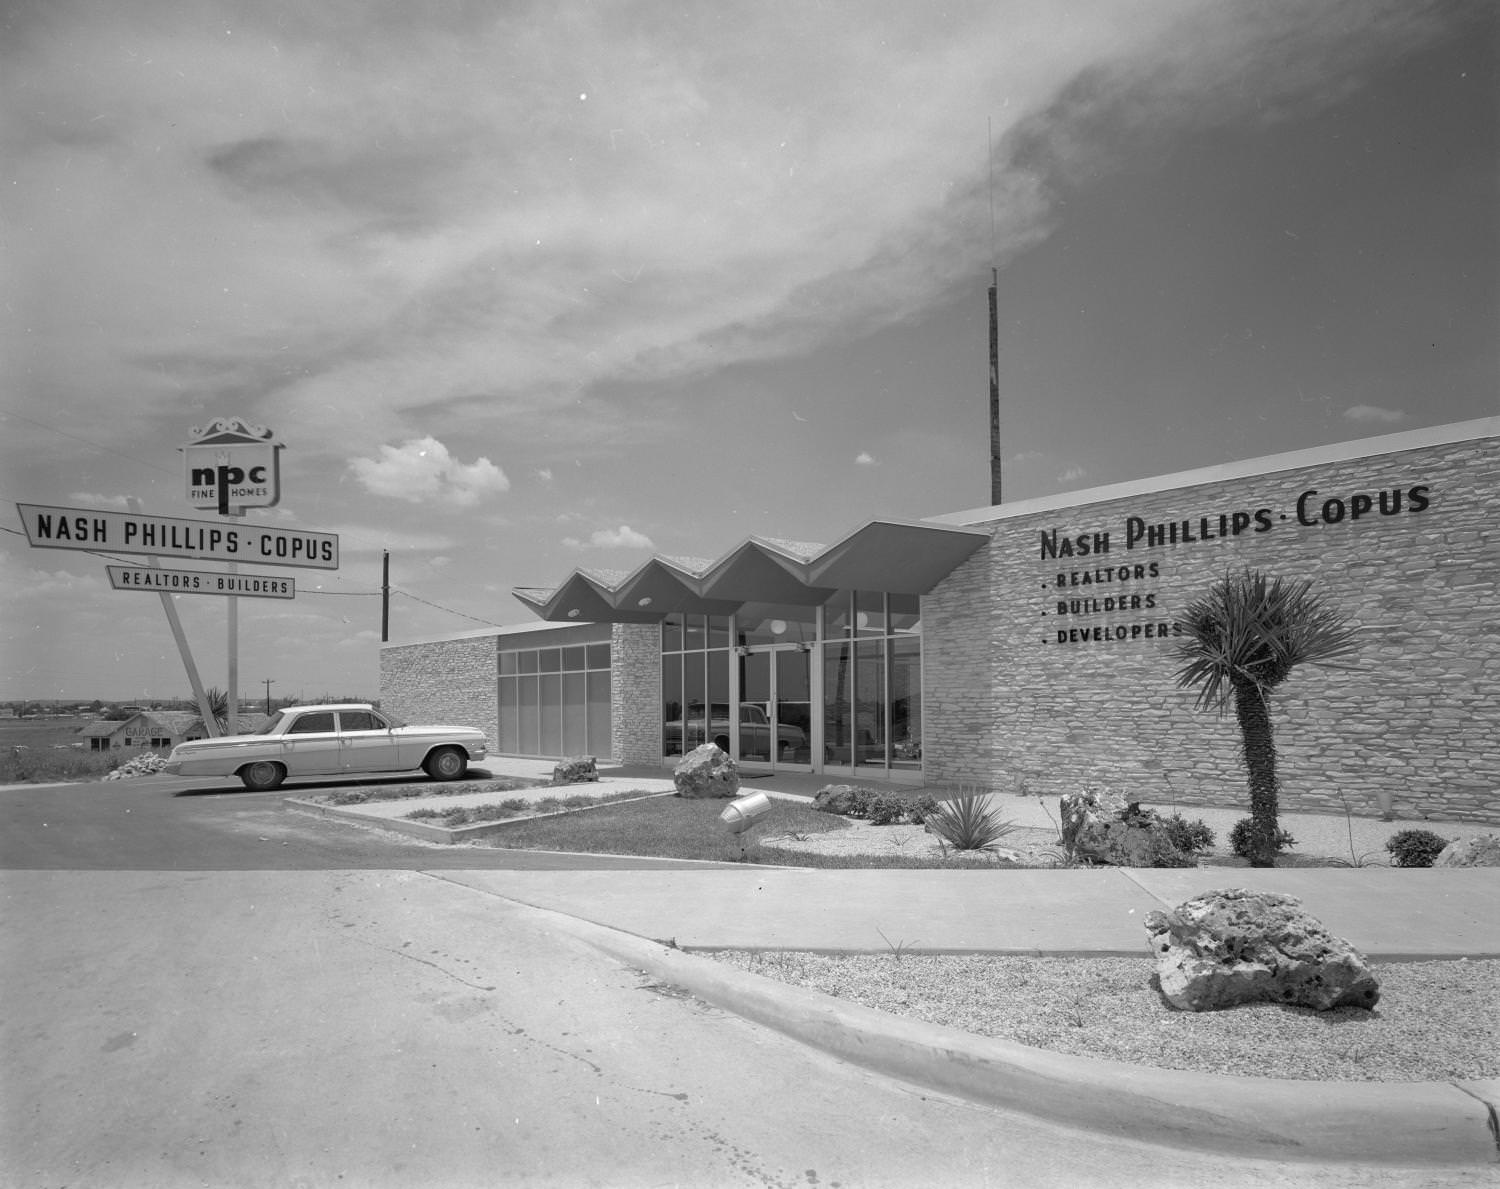 The exterior of the Nash Philips-Copus realtor office, since demolished, on 6010 Brooks Street, 1964